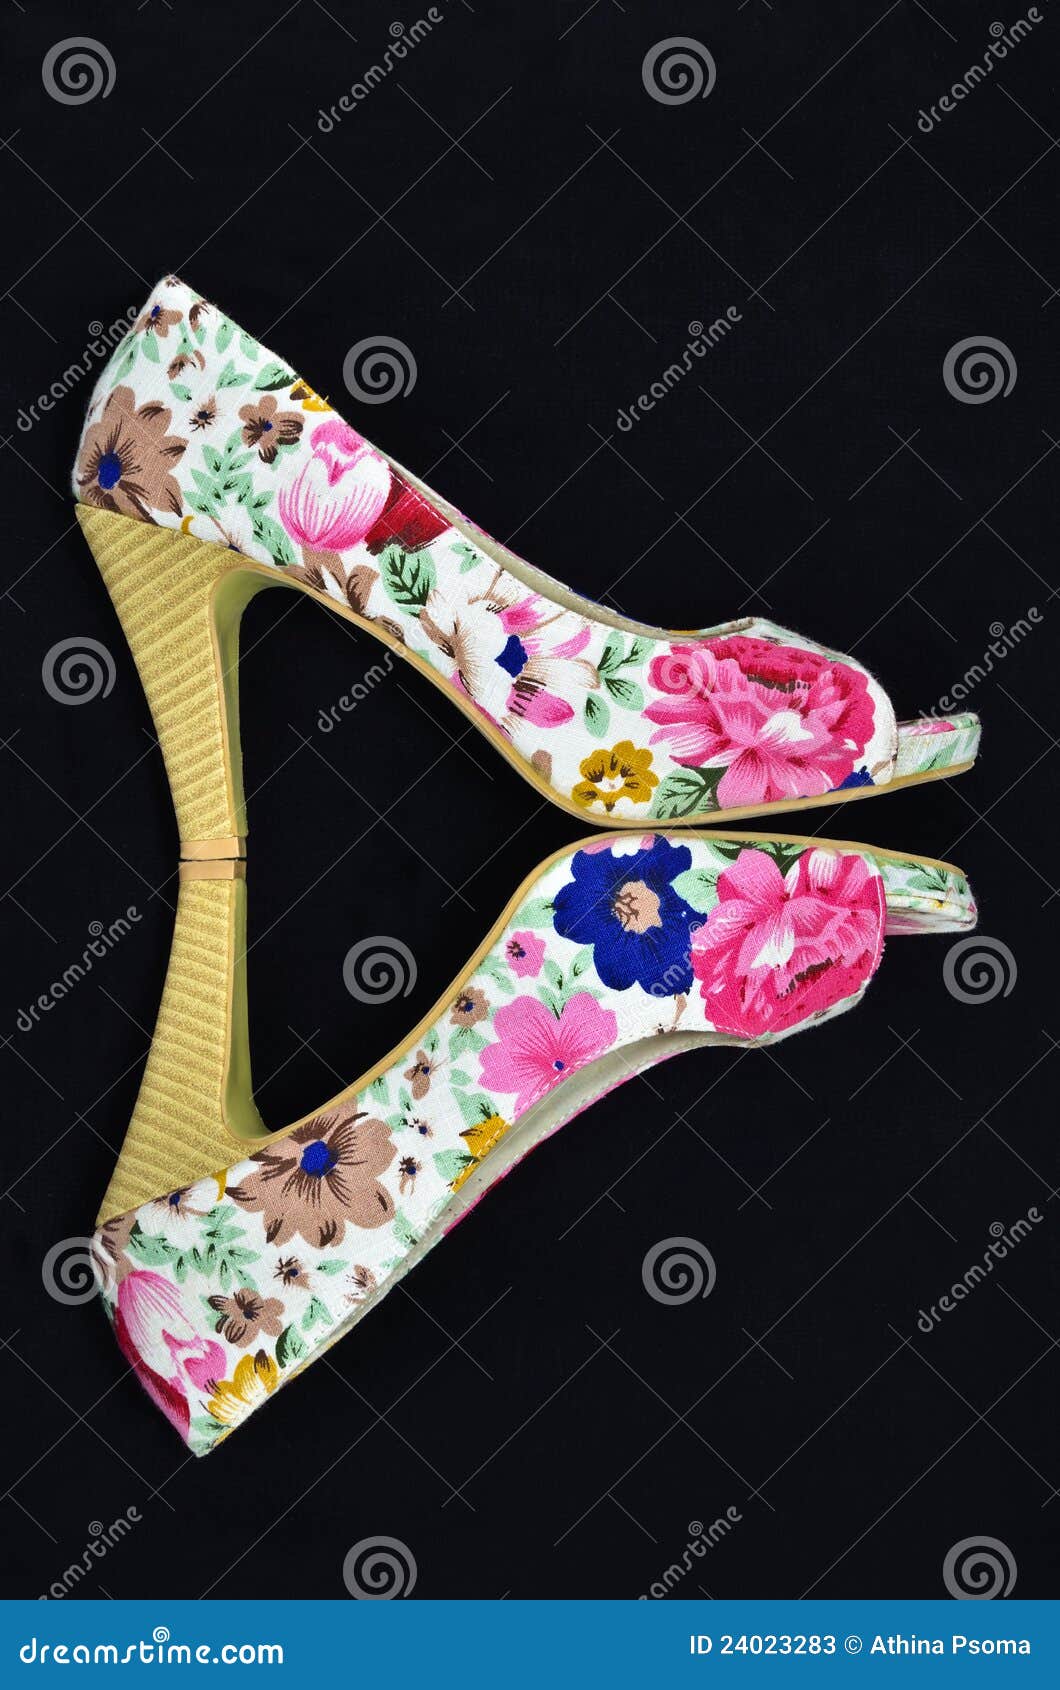 Floral shoes stock image. Image of feet, concept, accessories - 24023283